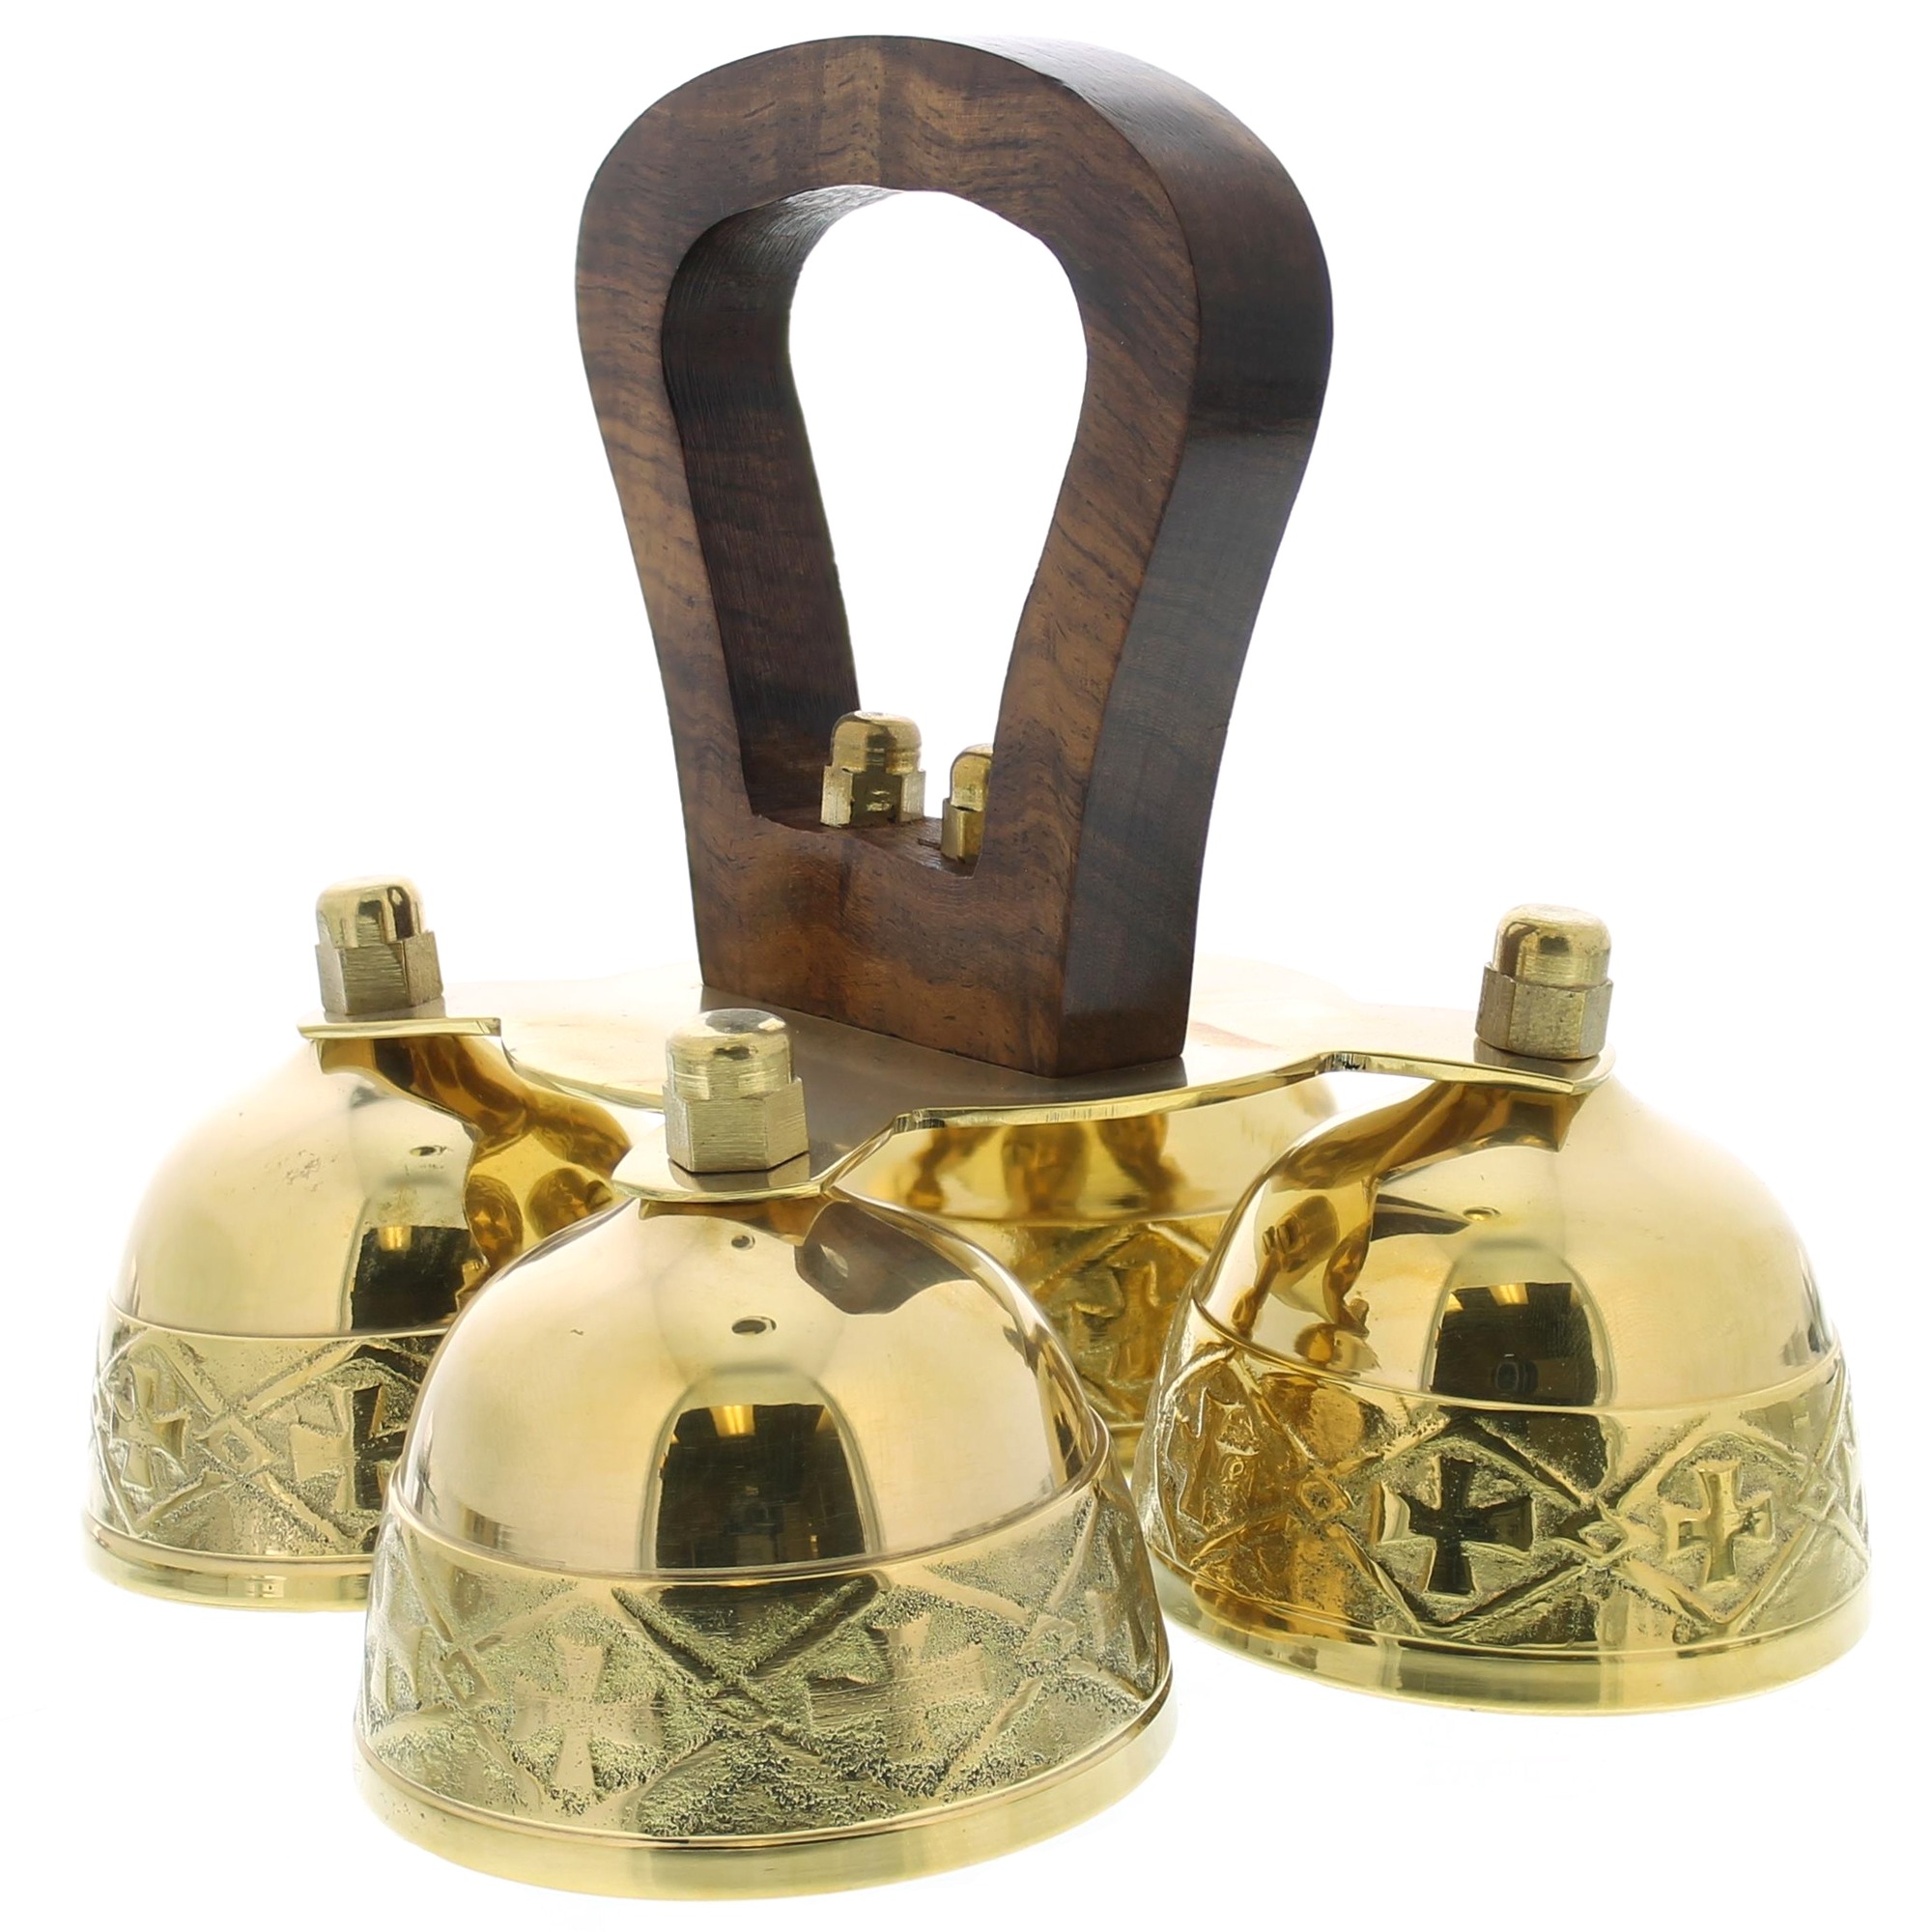 Embossed Brass 4-Bell Alter Bells with Wood Handle, 6 1/4 Inch